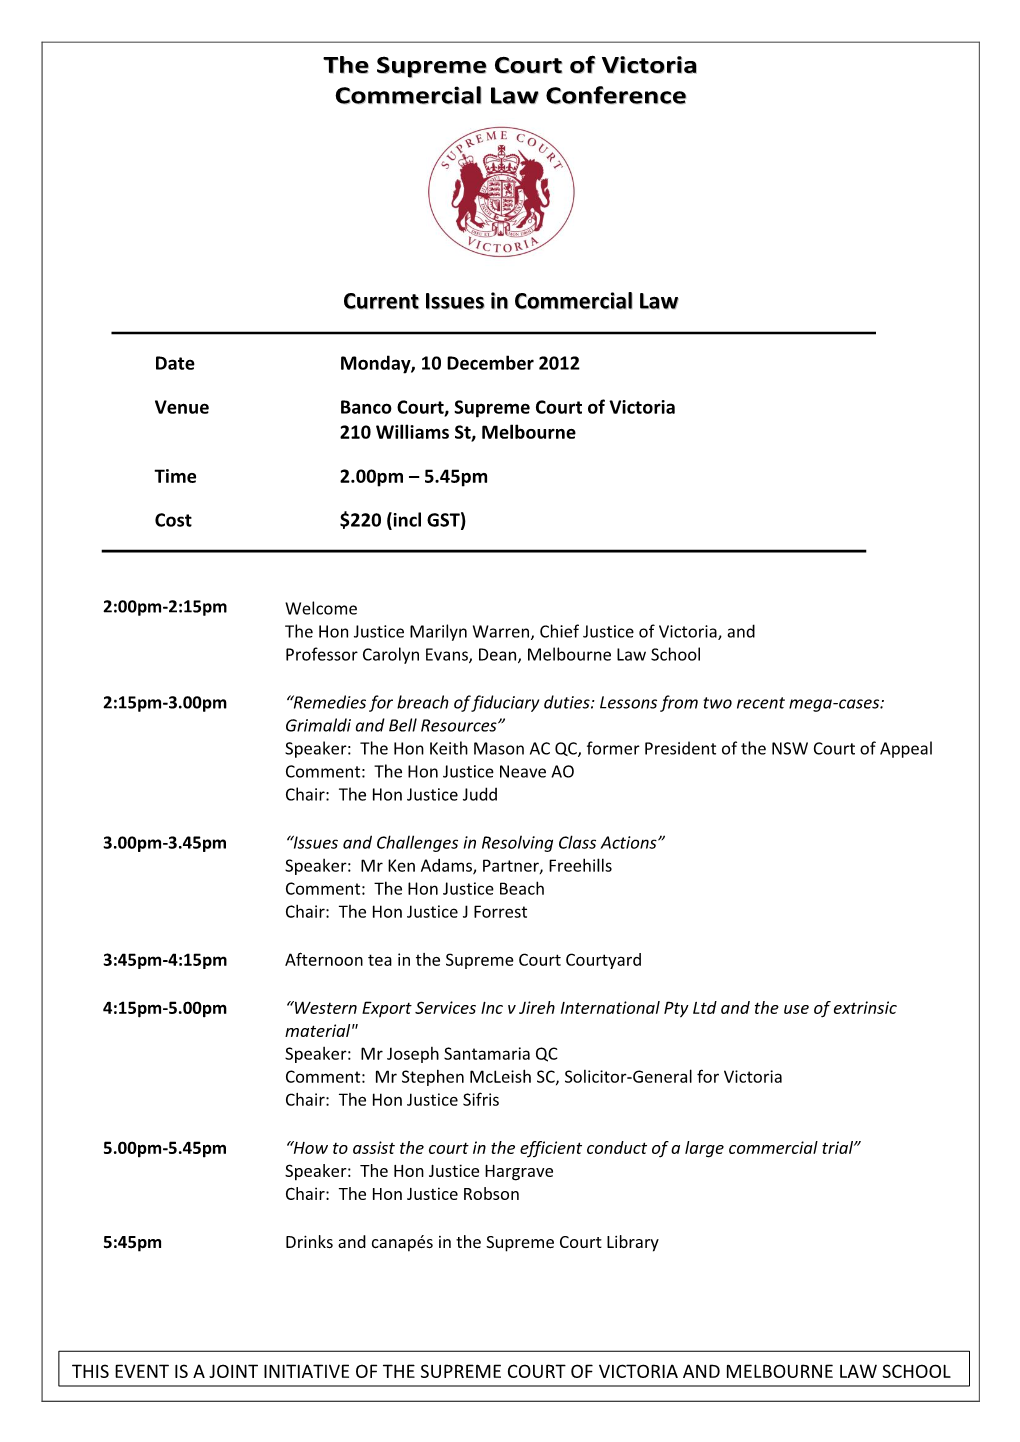 The Supreme Court of Victoria Commercial Law Conference